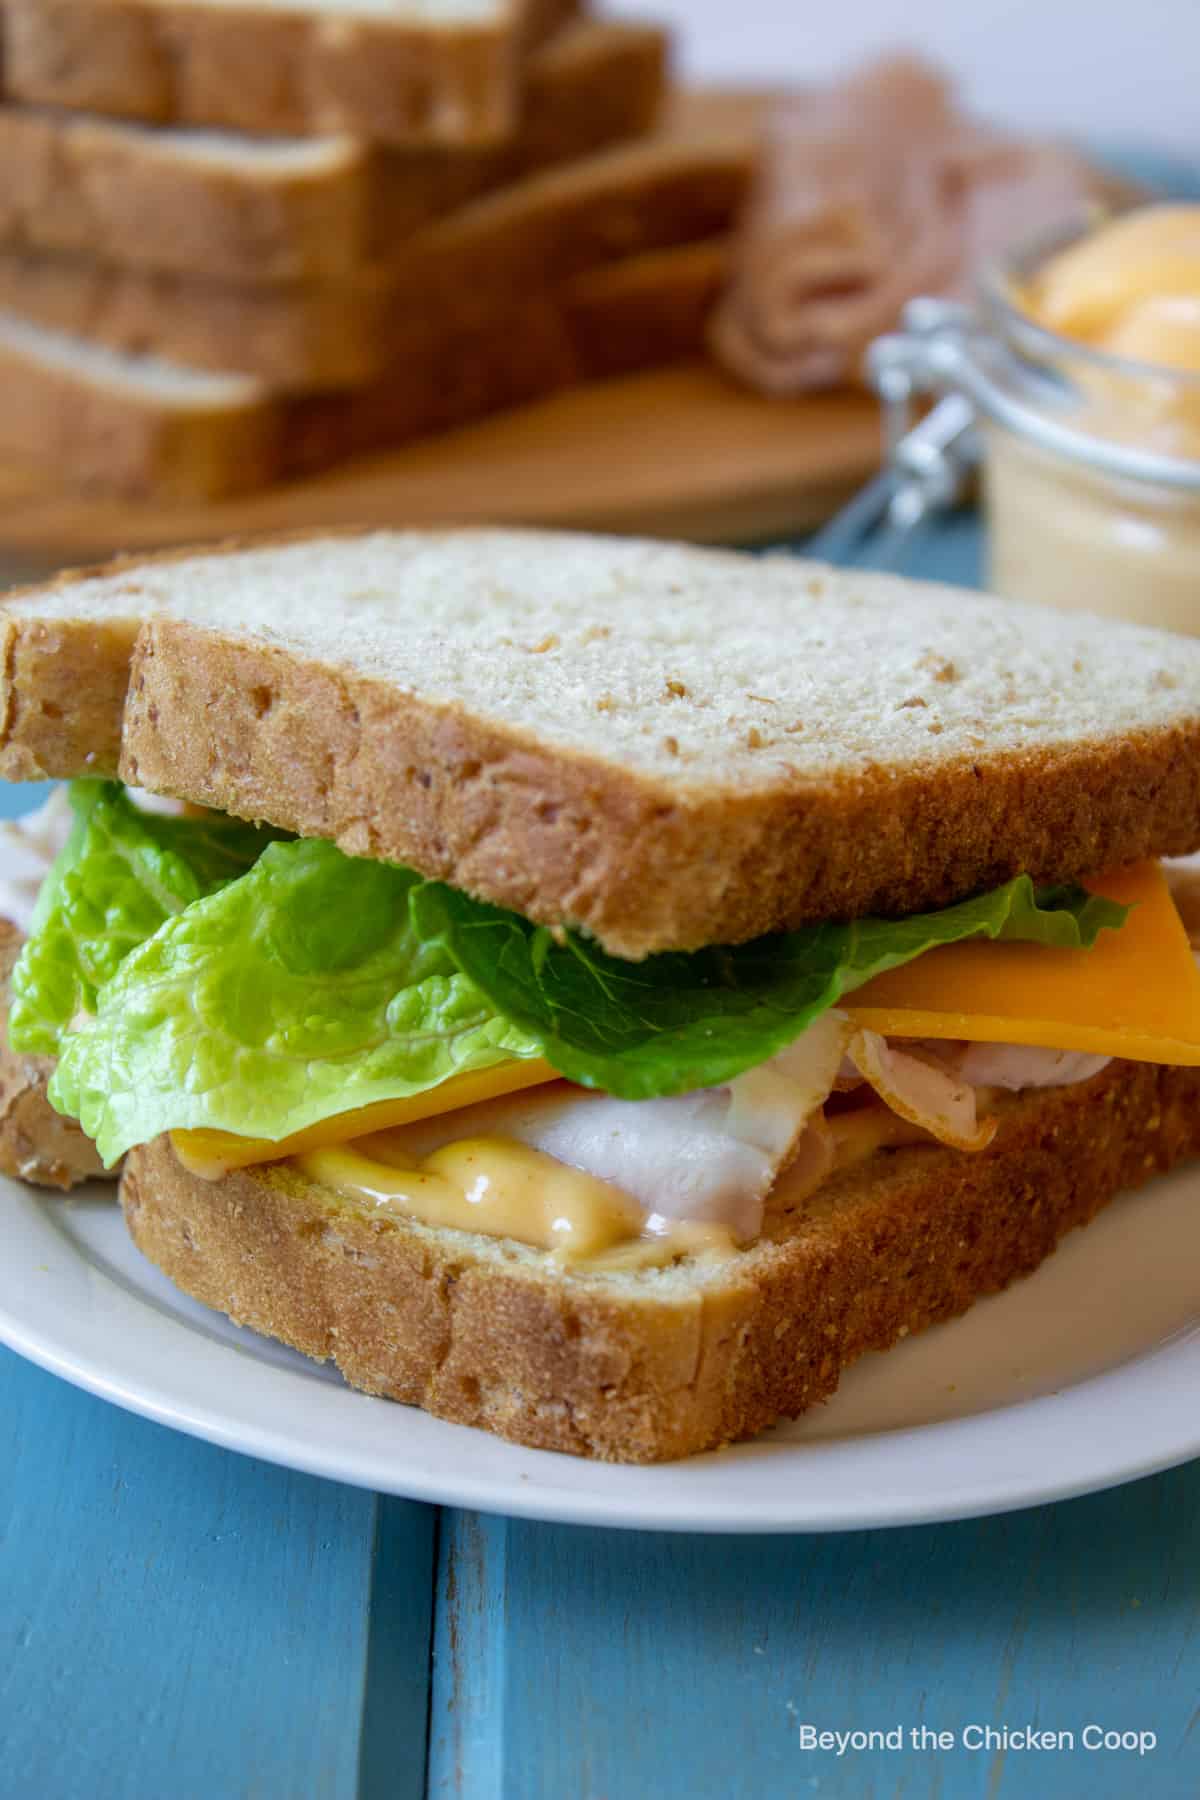 A turkey sandwich with lettuce and cheese.